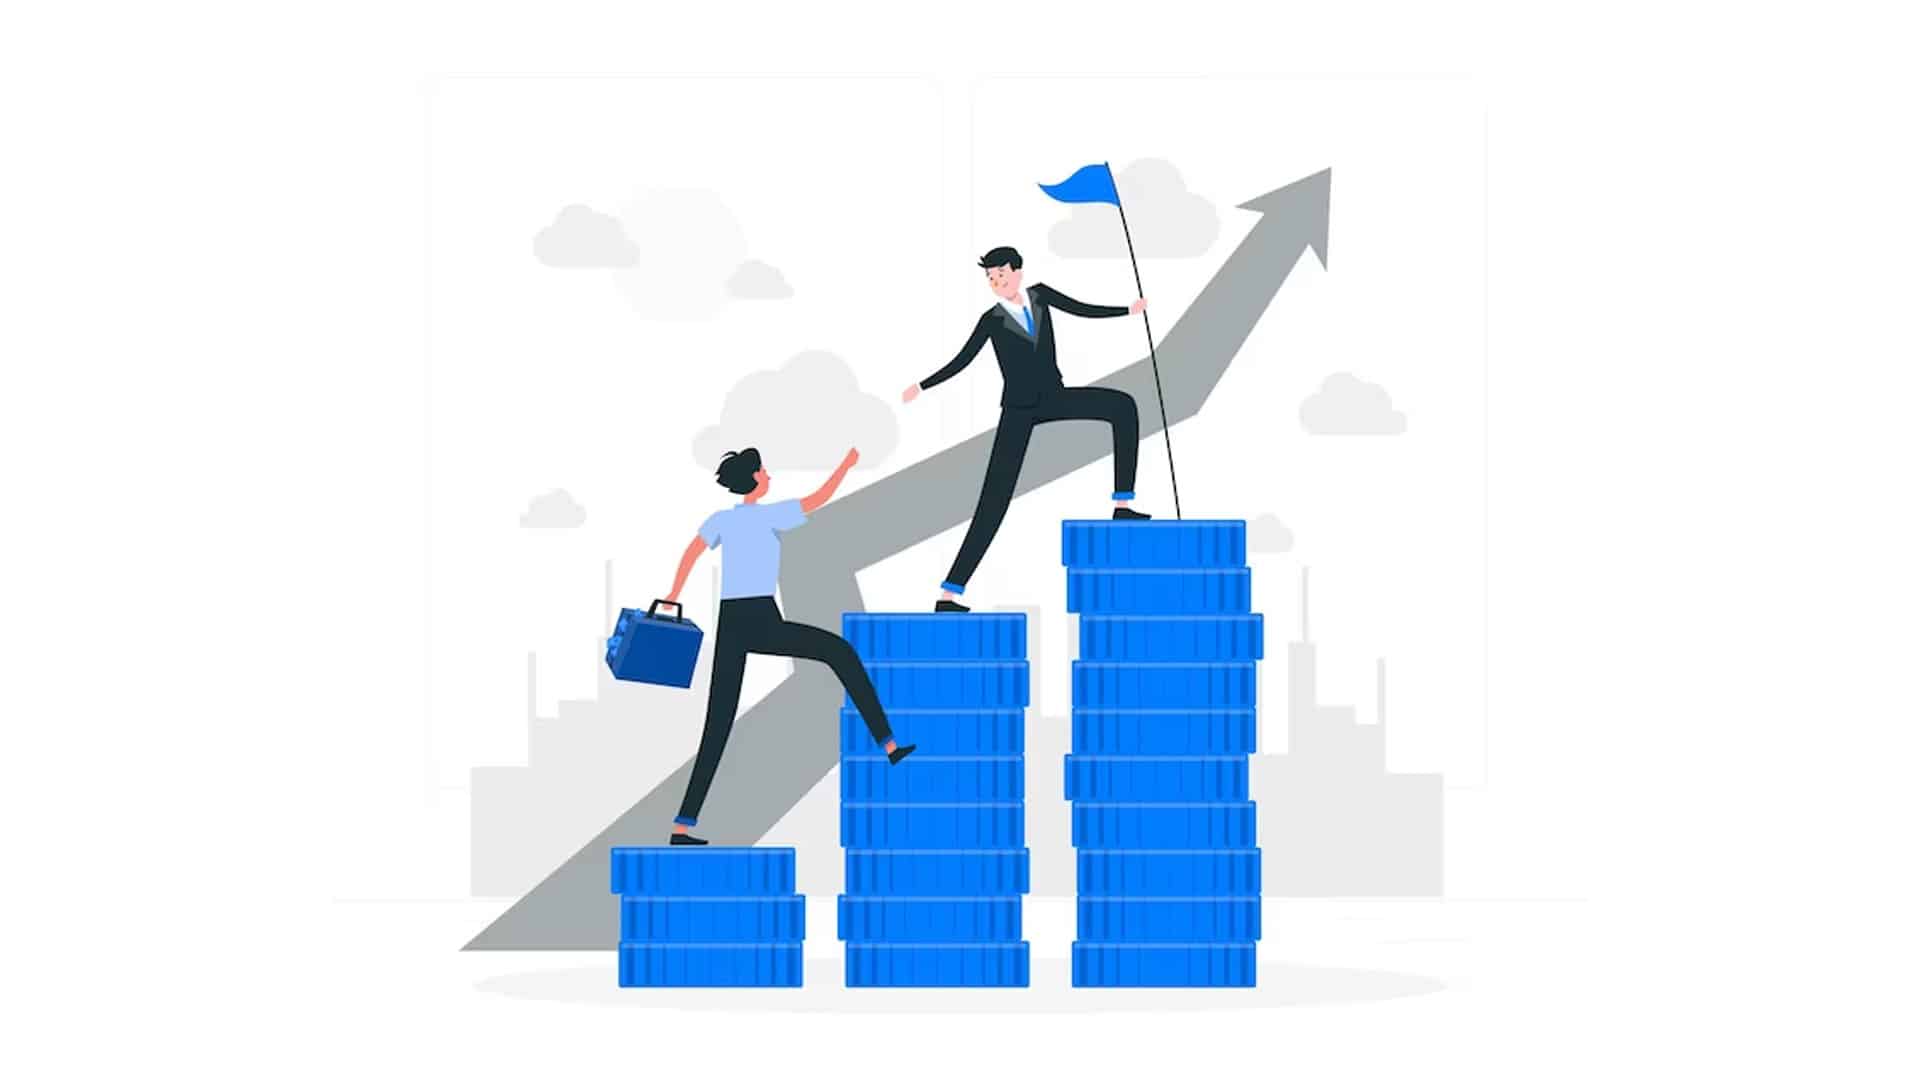 2 people standing on coins, one is higher than the other offering a hand up. Finance concept